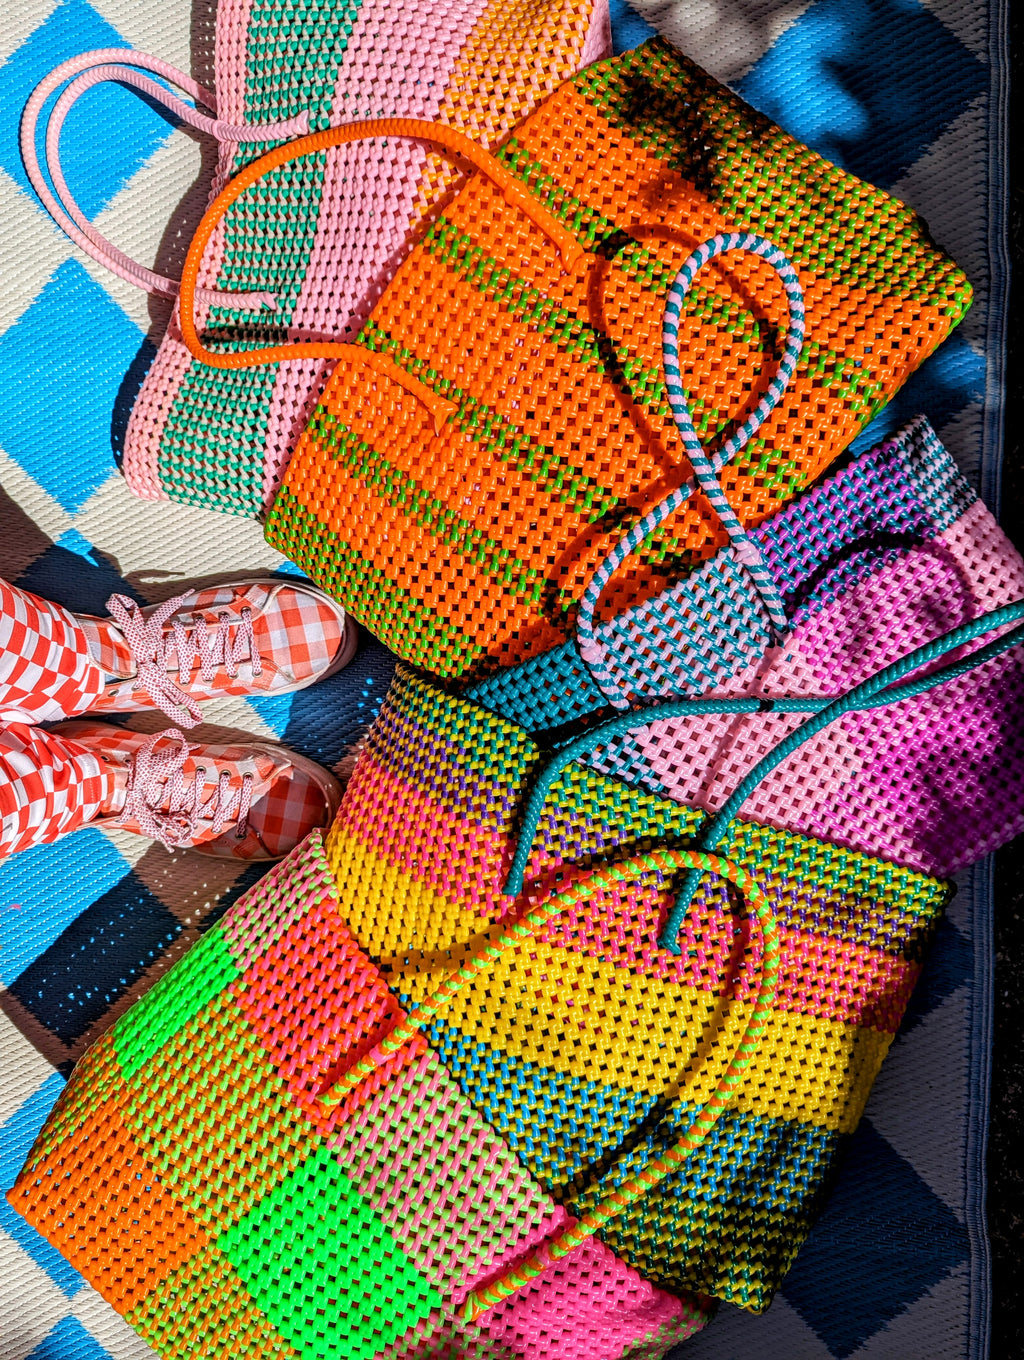 Colourful and super strong these gorgeous baskets are handmade just for us  in a fishing village in  Tamil Nadu!

We love a bit of scoubidou and these are made so beautifully by the women we work with, each takes 3 days to make in between looking after the house,family and fish! All are unique and every maker has their own style!

Sizes vary slightly due to their handmade nature. Handles are ong enough to wear over the shoulder.

Approx

30cm tall

45cm length

14cm wide

Excluding handles.